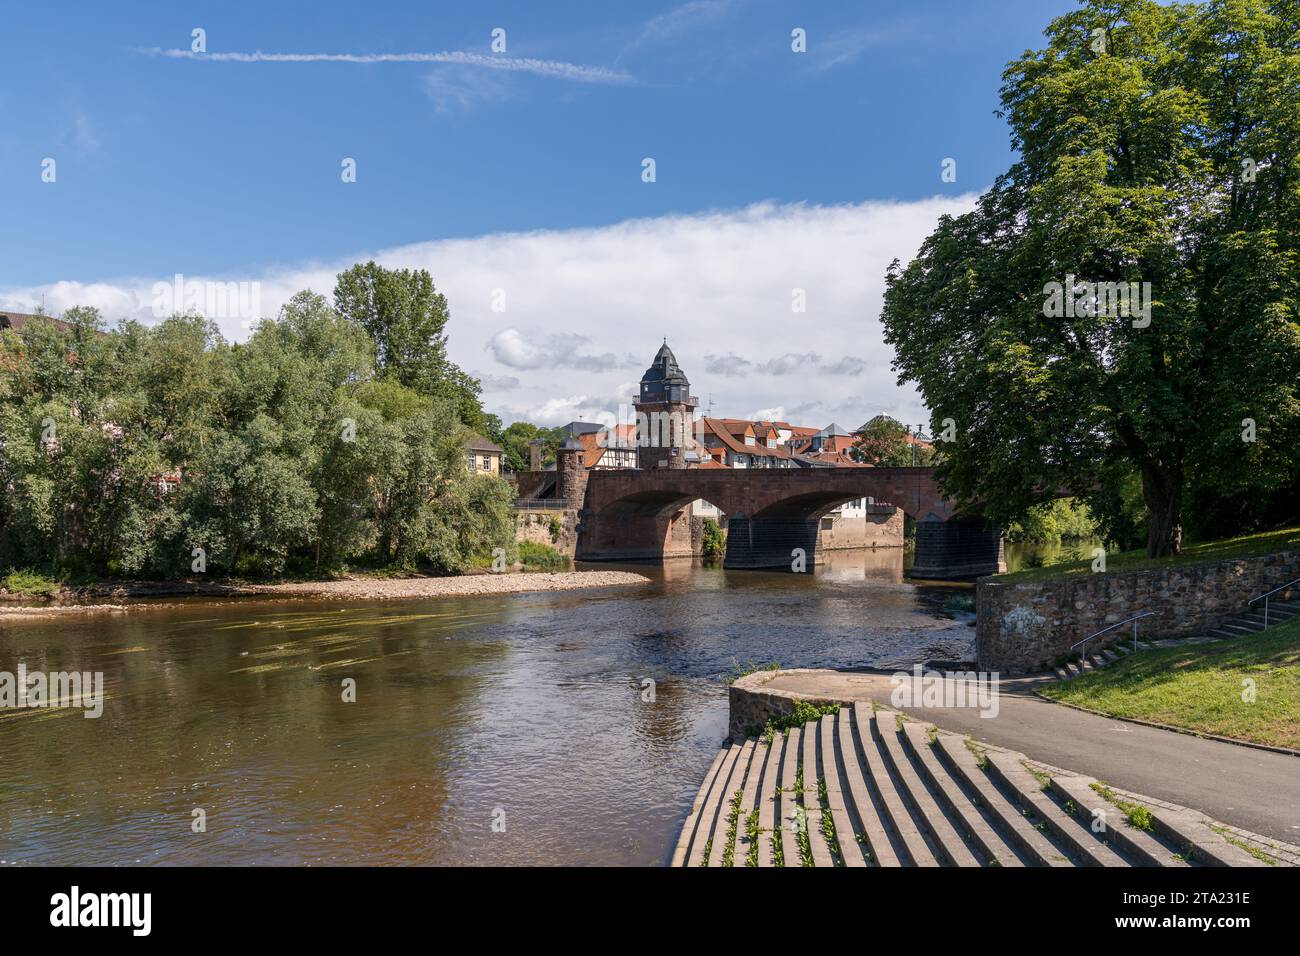 Bad Kreuznach, Rhineland-Palatine, Germany - June 29, 2021: View at the bridge over the River Nahe and the city Stock Photo